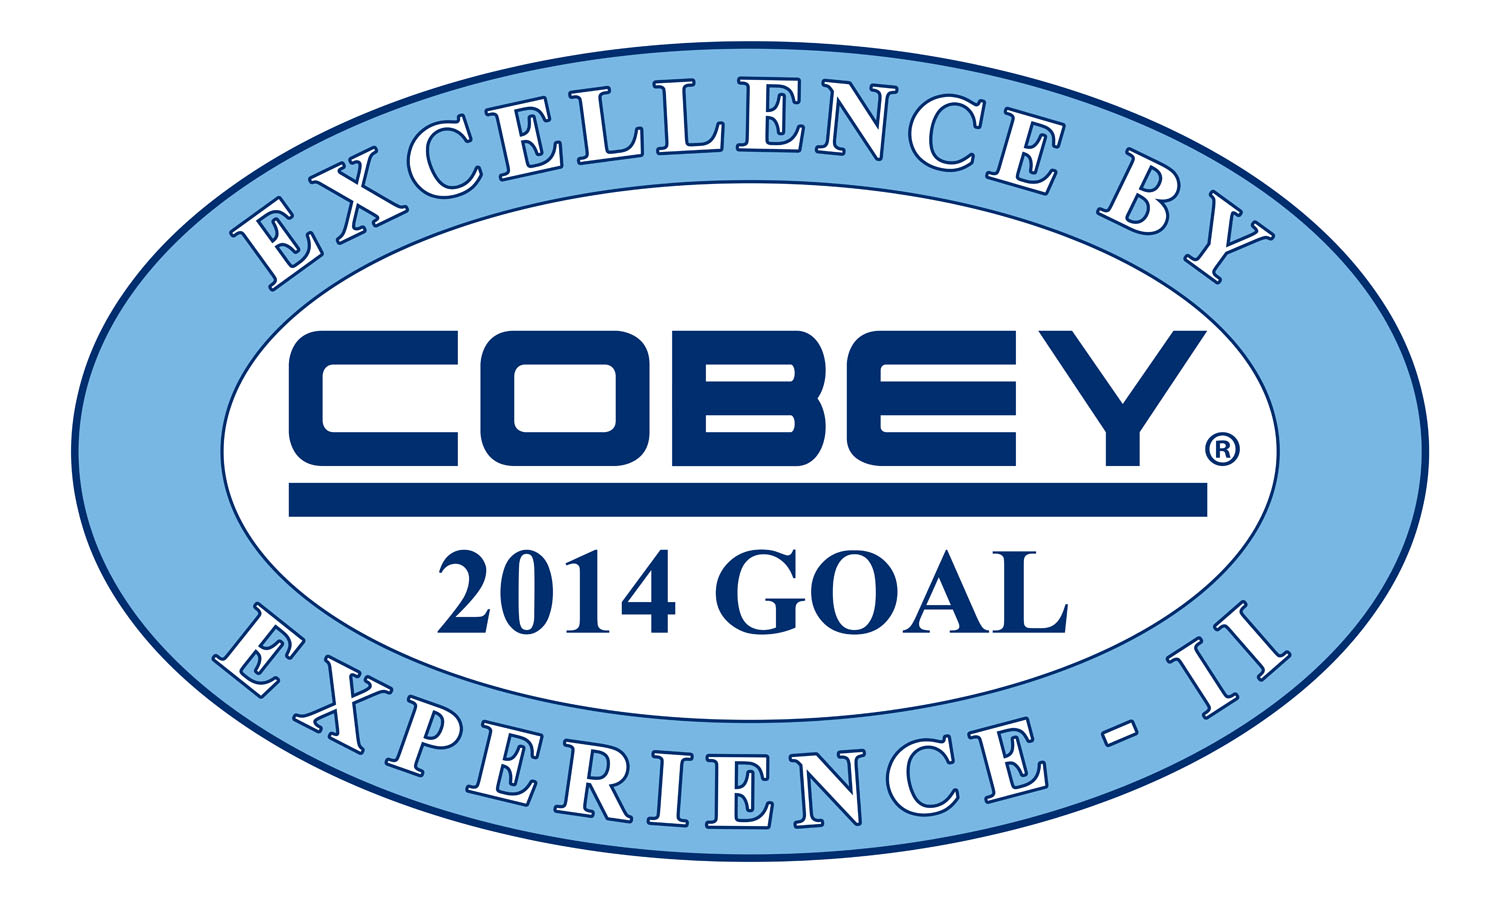 Cobey 2014 Goal - Excellence by Experience Pt II